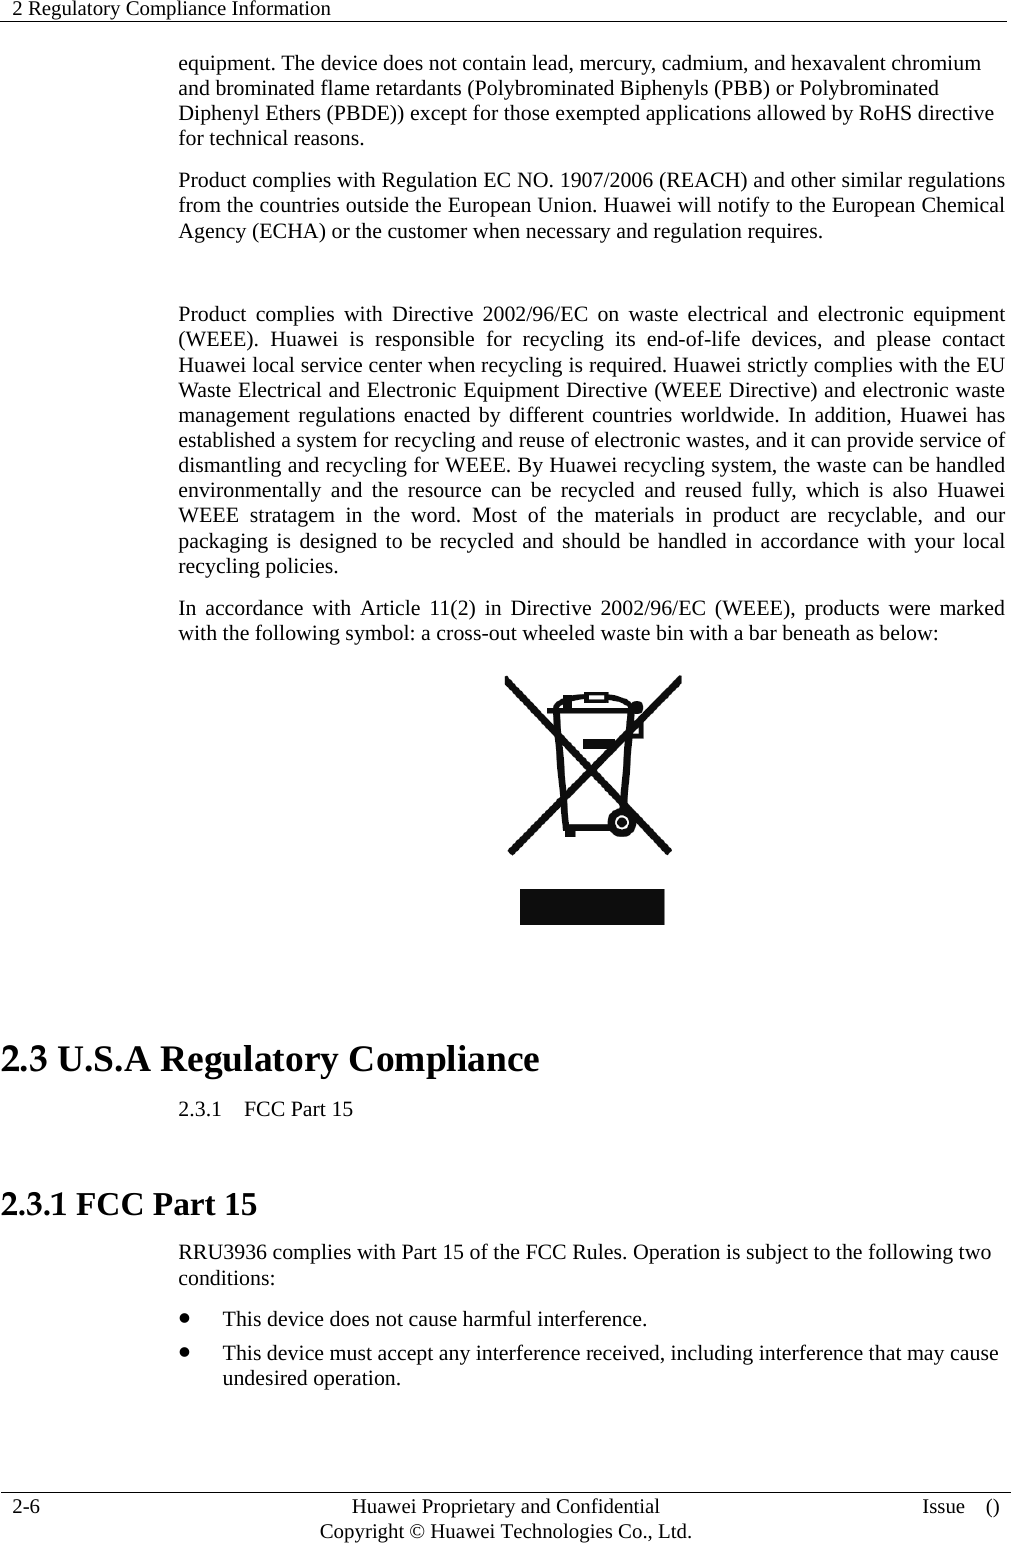 2 Regulatory Compliance Information     2-6  Huawei Proprietary and Confidential         Copyright © Huawei Technologies Co., Ltd.  Issue  ()  equipment. The device does not contain lead, mercury, cadmium, and hexavalent chromium and brominated flame retardants (Polybrominated Biphenyls (PBB) or Polybrominated Diphenyl Ethers (PBDE)) except for those exempted applications allowed by RoHS directive for technical reasons.   Product complies with Regulation EC NO. 1907/2006 (REACH) and other similar regulations from the countries outside the European Union. Huawei will notify to the European Chemical Agency (ECHA) or the customer when necessary and regulation requires.  Product complies with Directive 2002/96/EC on waste electrical and electronic equipment (WEEE). Huawei is responsible for recycling its end-of-life devices, and please contact Huawei local service center when recycling is required. Huawei strictly complies with the EU Waste Electrical and Electronic Equipment Directive (WEEE Directive) and electronic waste management regulations enacted by different countries worldwide. In addition, Huawei has established a system for recycling and reuse of electronic wastes, and it can provide service of dismantling and recycling for WEEE. By Huawei recycling system, the waste can be handled environmentally and the resource can be recycled and reused fully, which is also Huawei WEEE stratagem in the word. Most of the materials in product are recyclable, and our packaging is designed to be recycled and should be handled in accordance with your local recycling policies.   In accordance with Article 11(2) in Directive 2002/96/EC (WEEE), products were marked with the following symbol: a cross-out wheeled waste bin with a bar beneath as below:   2.3 U.S.A Regulatory Compliance 2.3.1  FCC Part 15  2.3.1 FCC Part 15 RRU3936 complies with Part 15 of the FCC Rules. Operation is subject to the following two conditions:  This device does not cause harmful interference.  This device must accept any interference received, including interference that may cause undesired operation. 